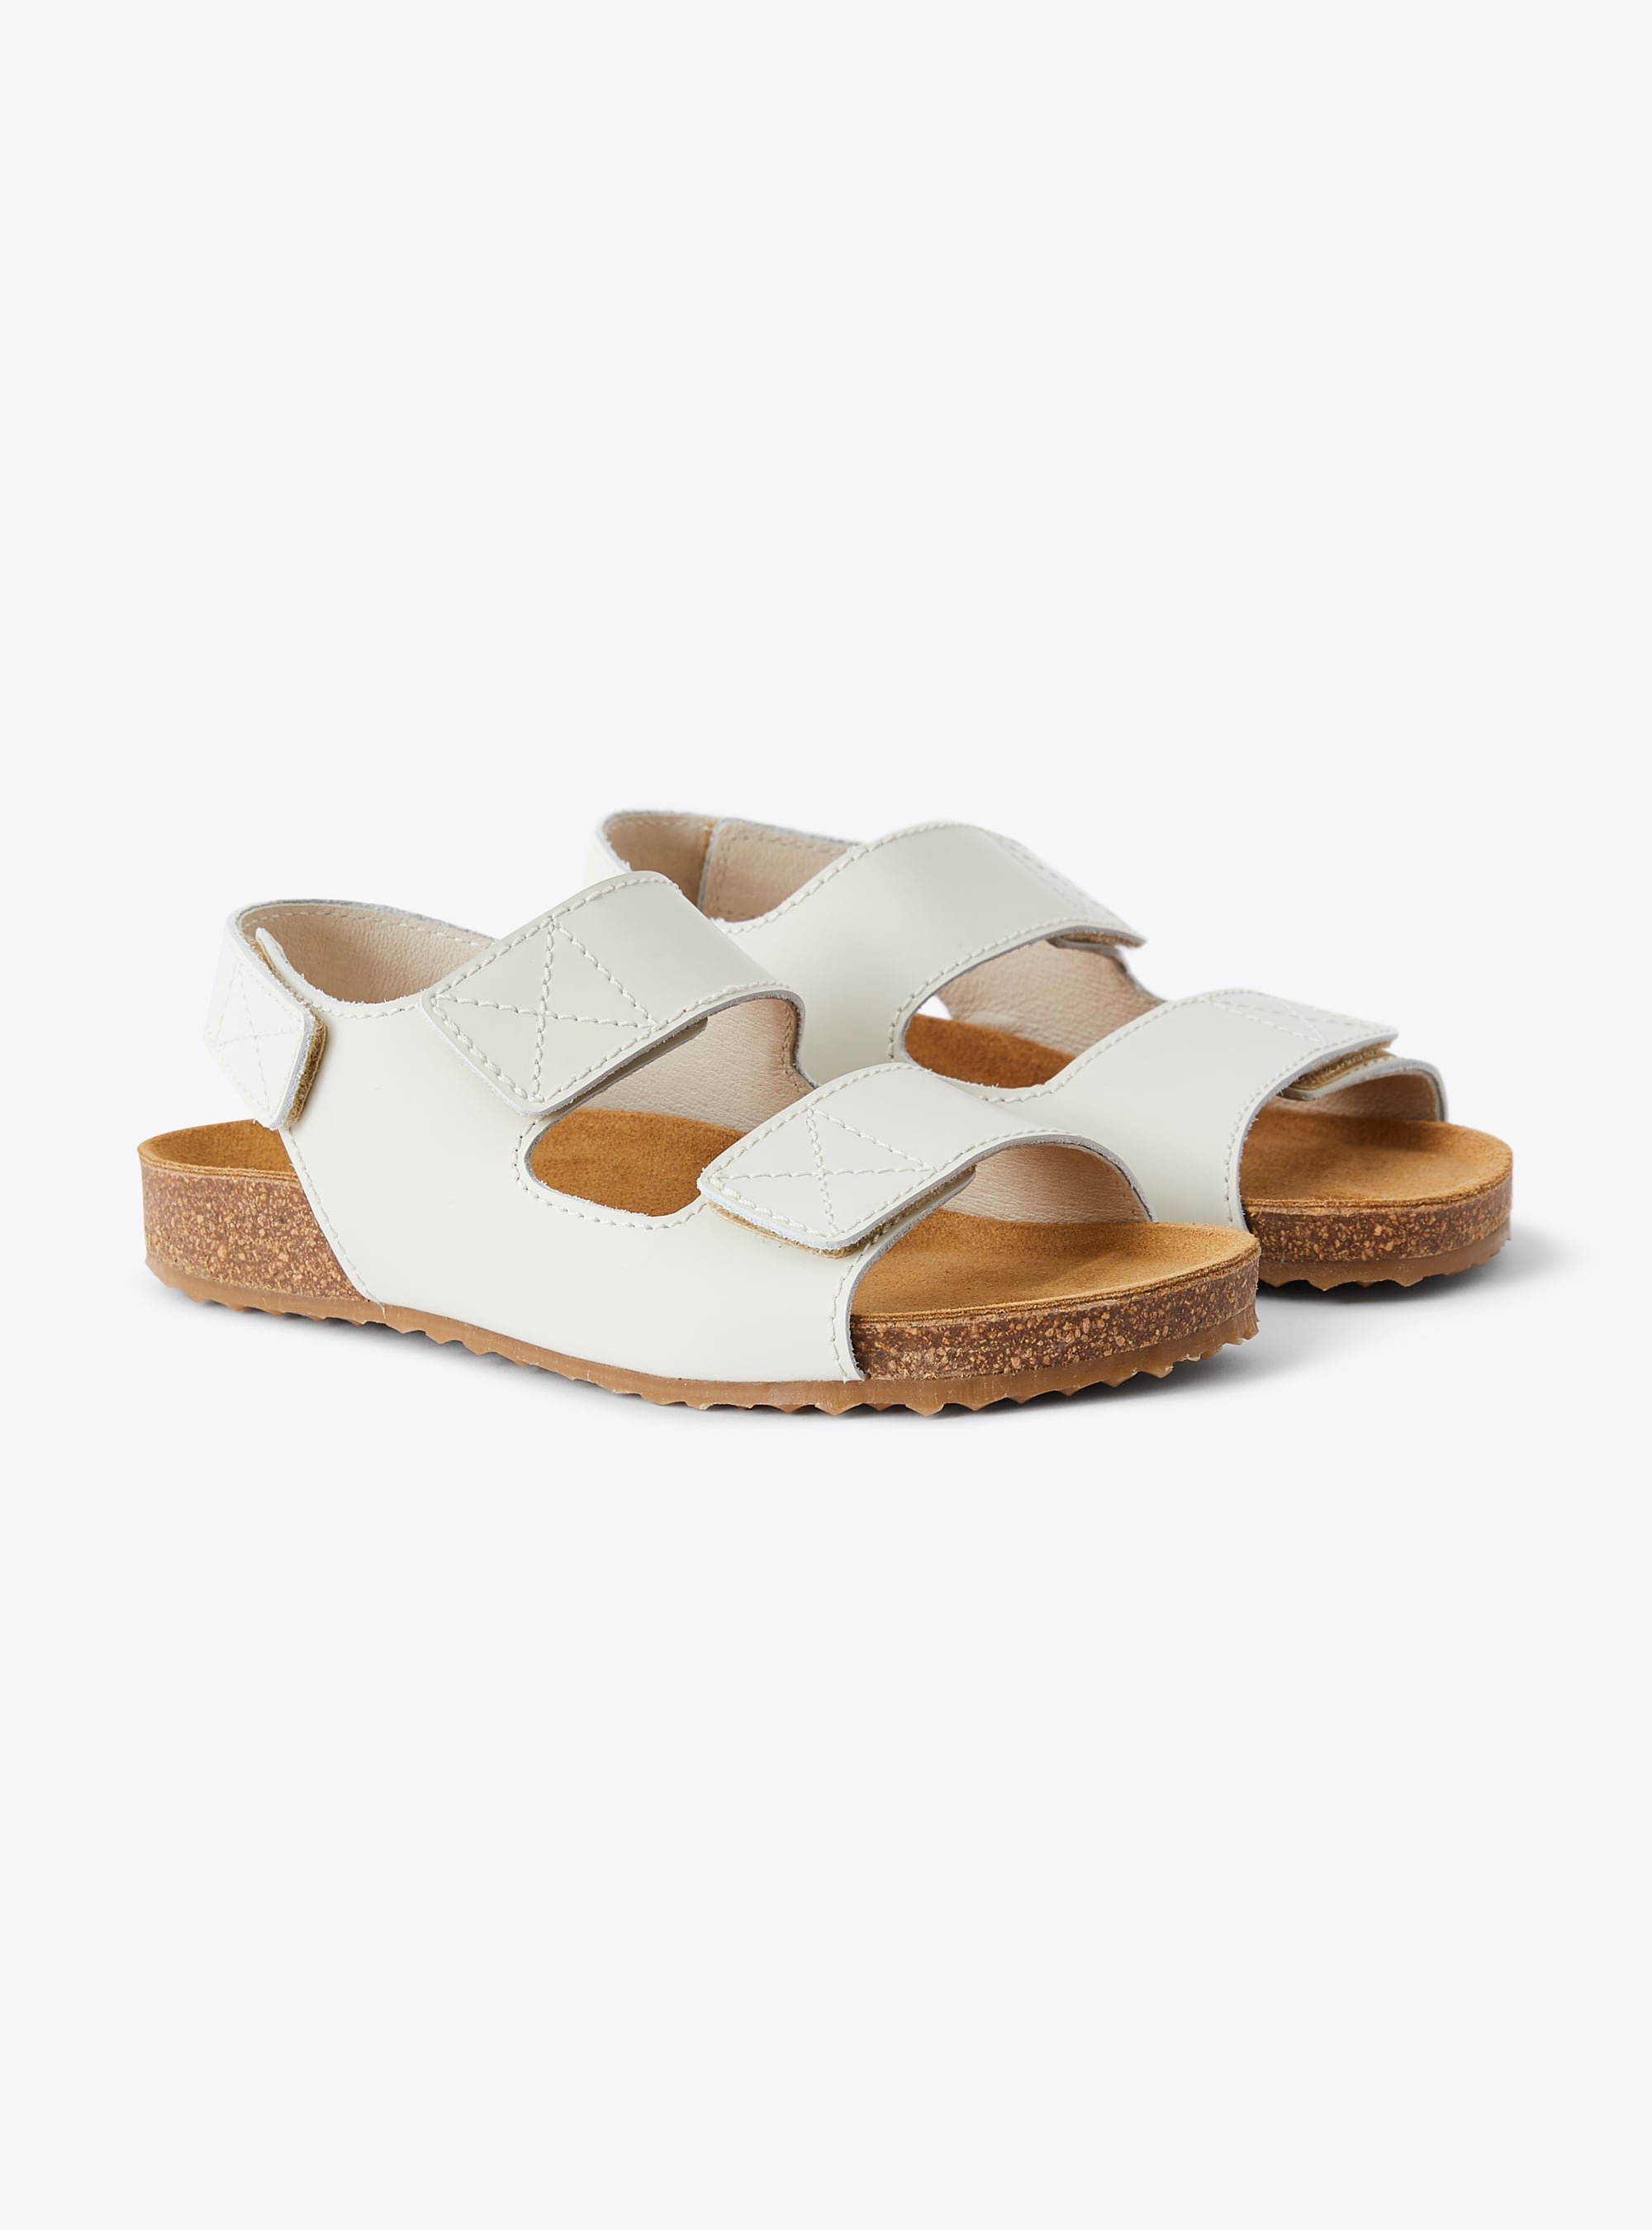 Junior sandal with velcro strip in white - Shoes - Il Gufo